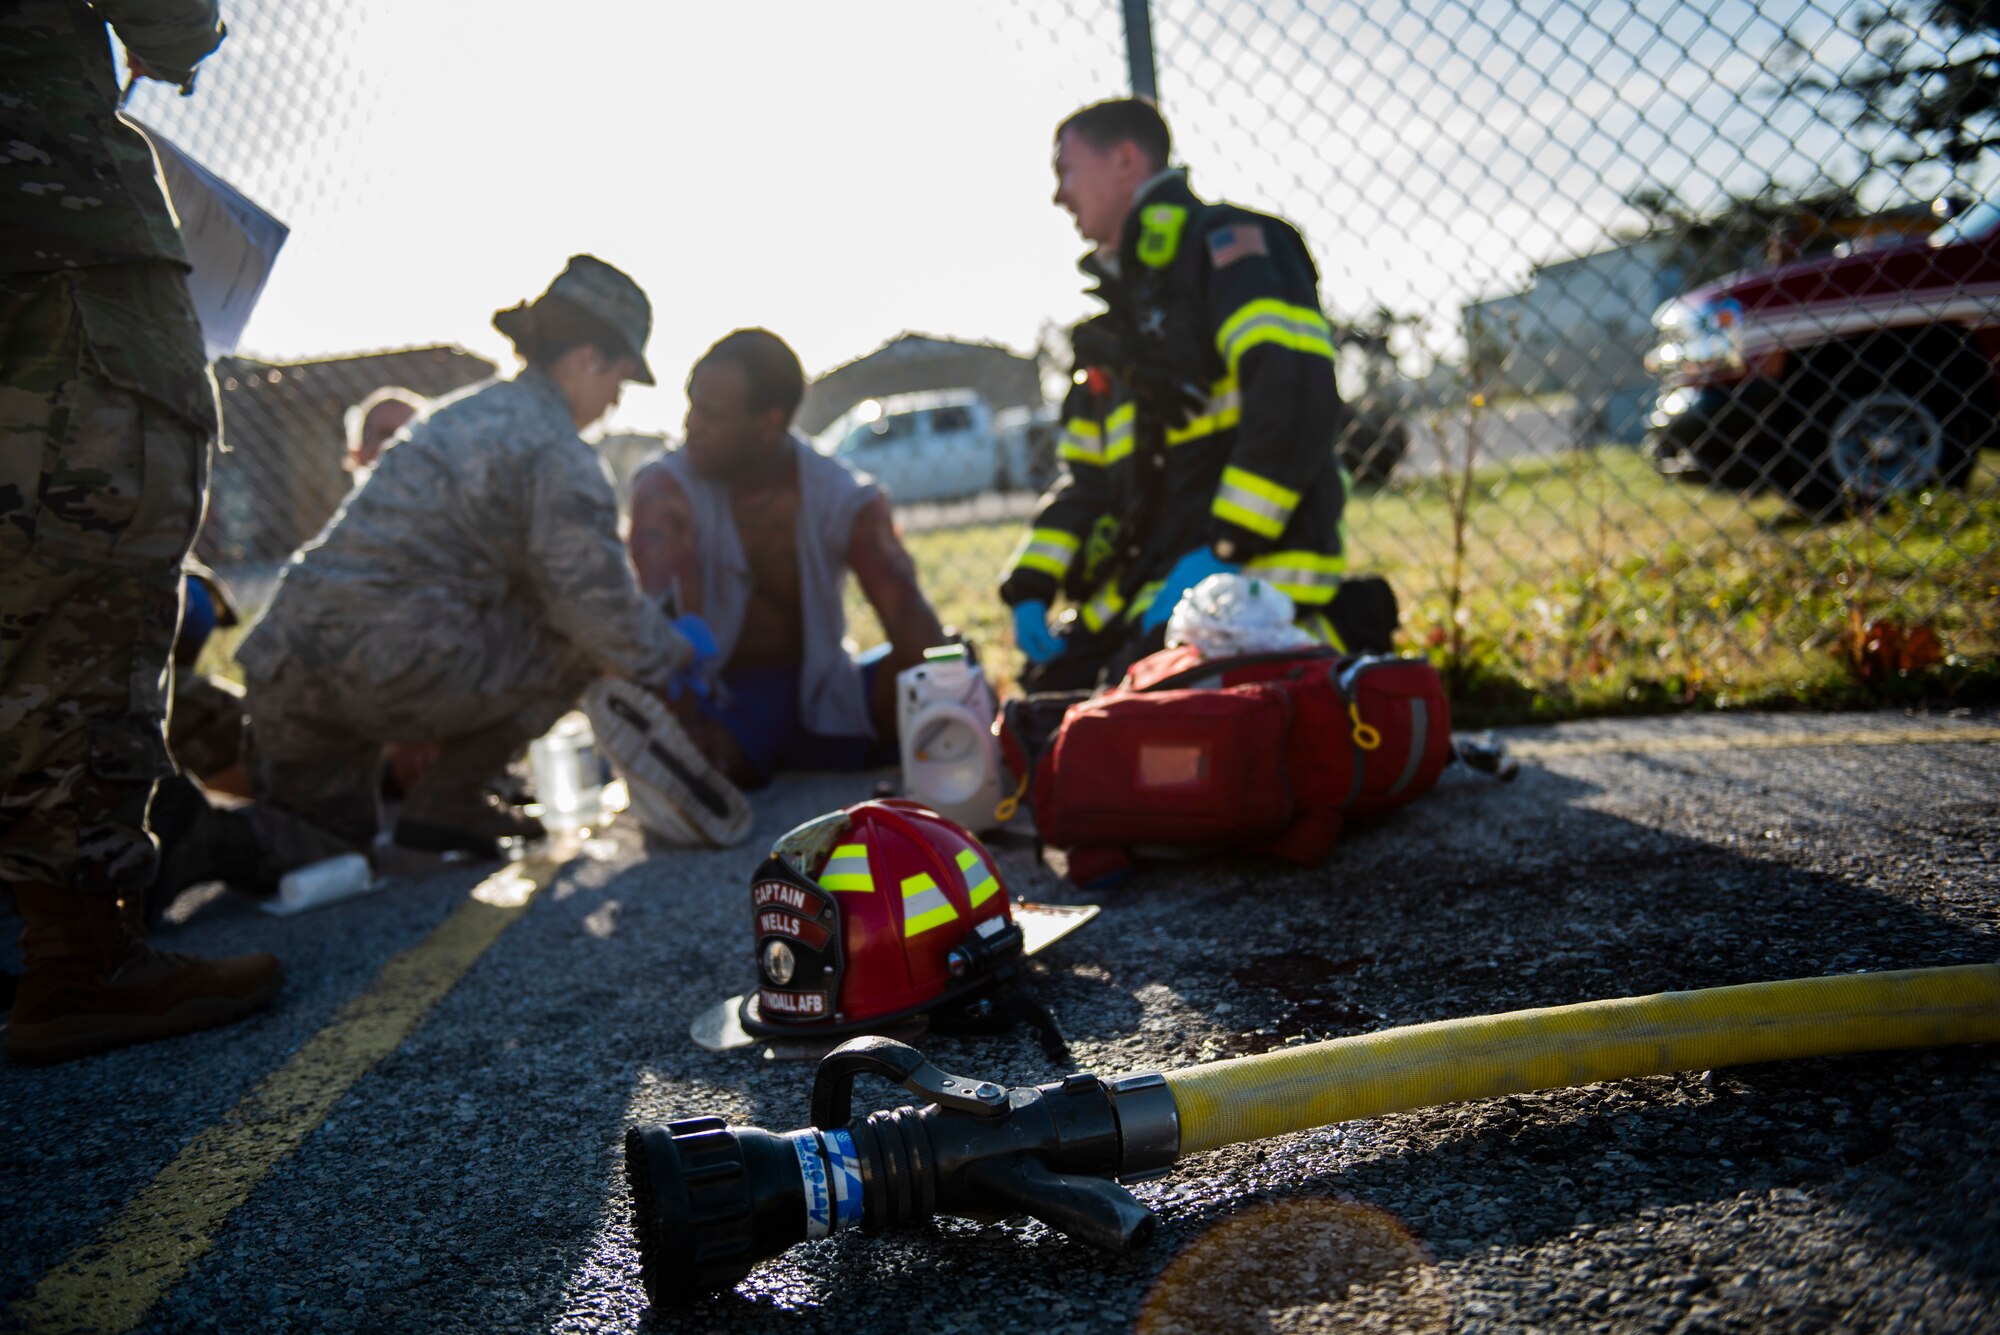 Senior Airman Ashley Deliz Aguilera, left, and Staff Sgt. Zachary Collins, center, 325th Operational Medical Readiness Squadron Ambulance Services Department technicians, participates in a medical emergency exercise at Tyndall Air Force Base, Florida, March 12, 2020. A joint medical exercise was conducted and included the 325th Medical Group, Bay County Emergency Medical Services and Ascension Sacred Heart Bay Medical Center. (U.S. Air Force photo by Staff Sgt. Magen M. Reeves)